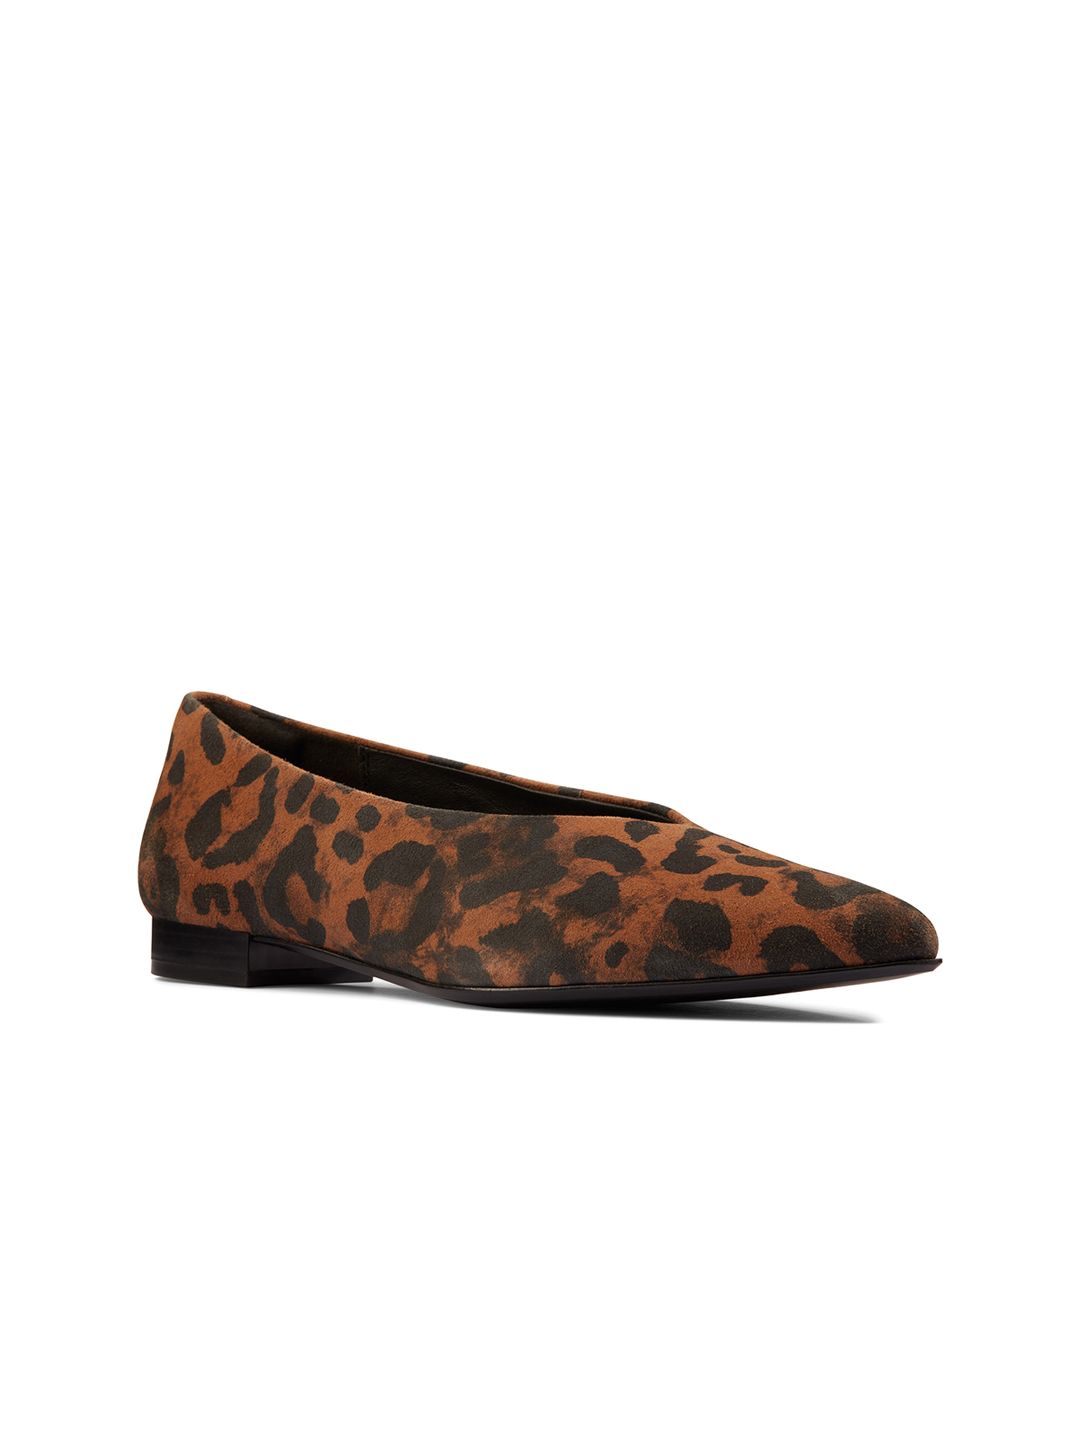 Clarks Women Brown Leopard Printed Leather Loafers Price in India